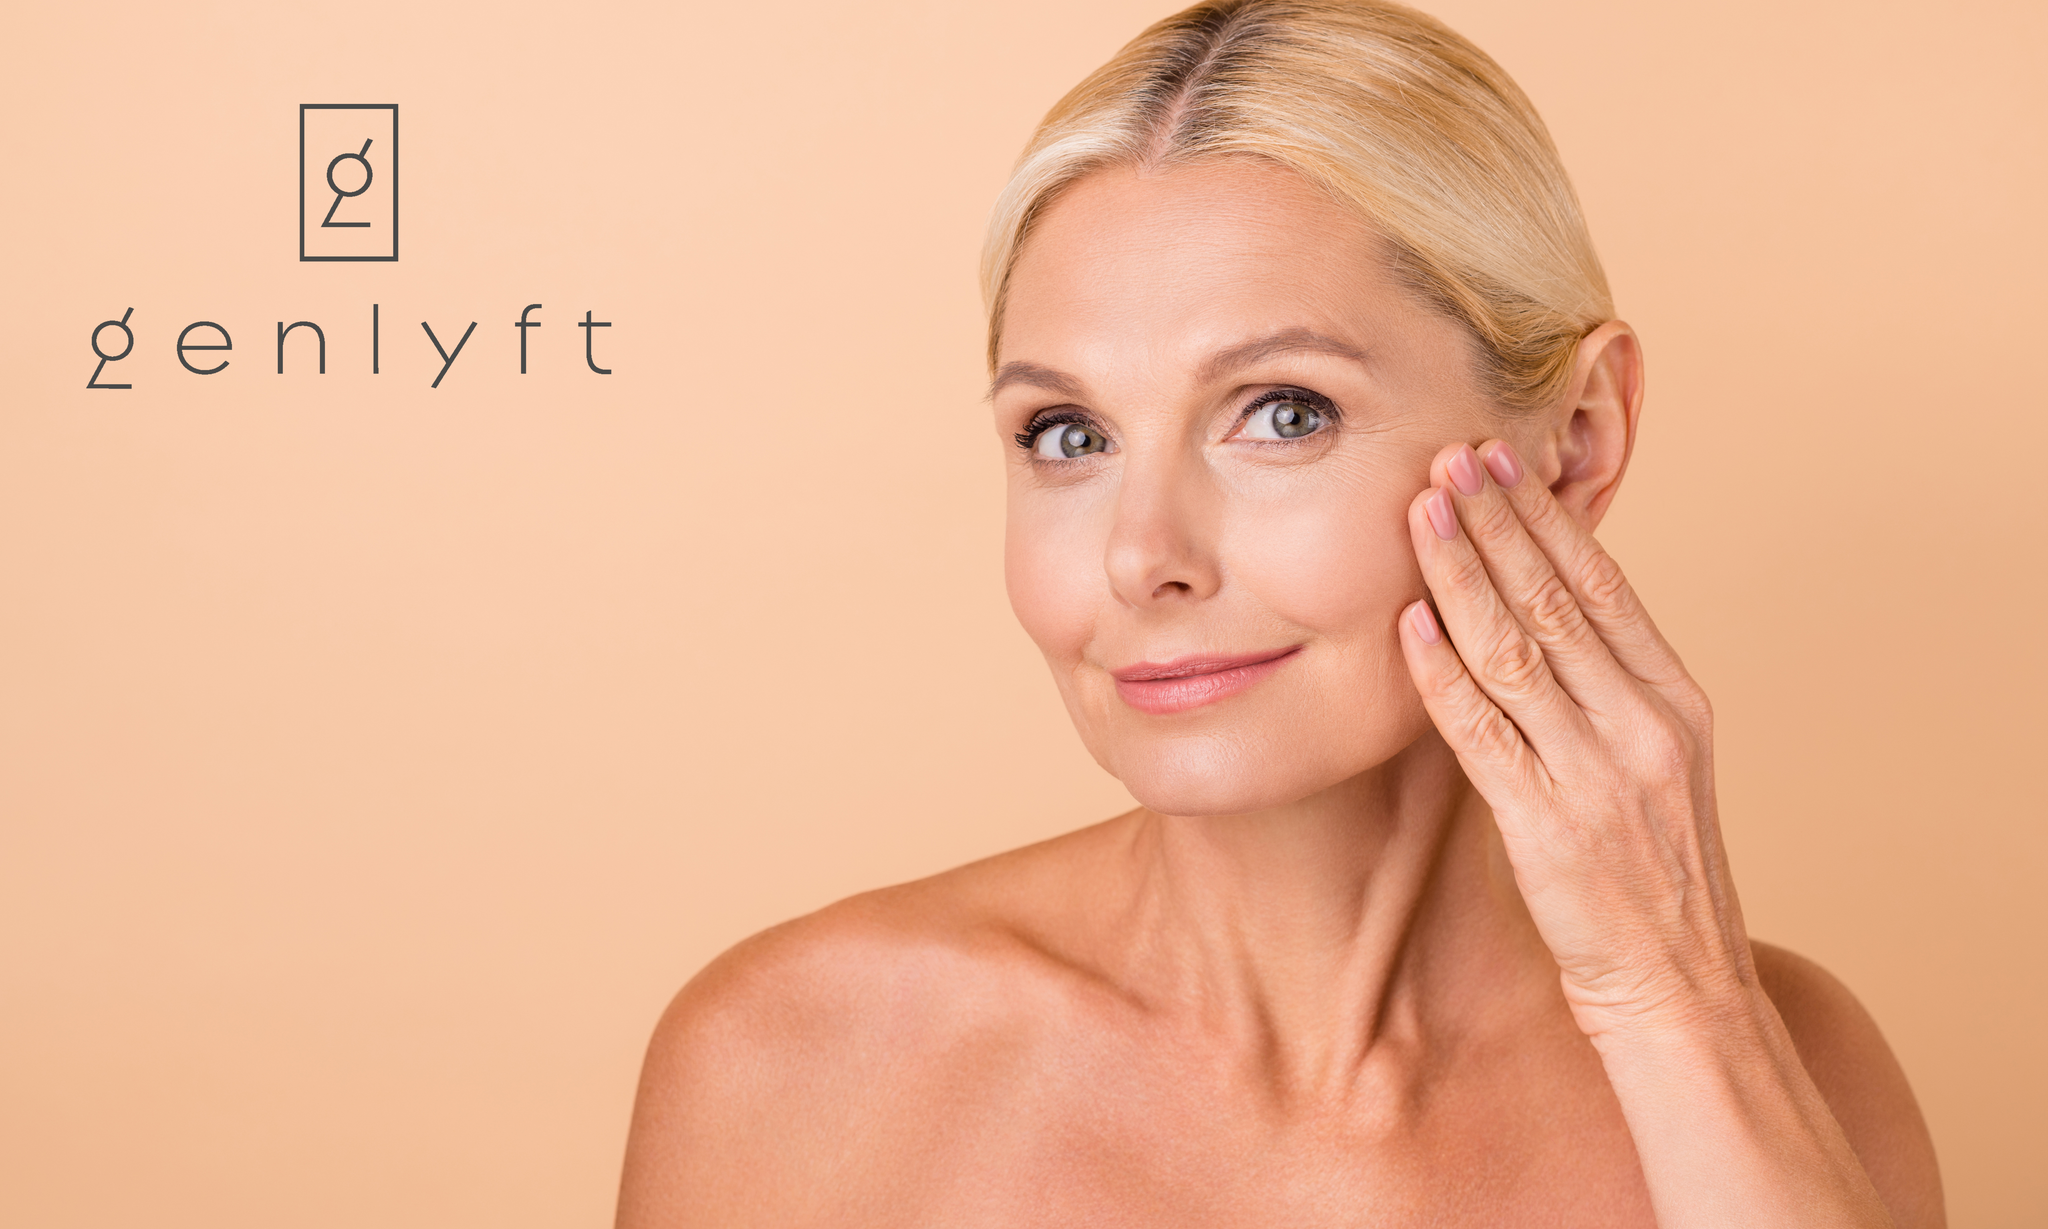 Introducing Genlyft®, The Next Generation of Facelifts, Exclusively at BeautyFix